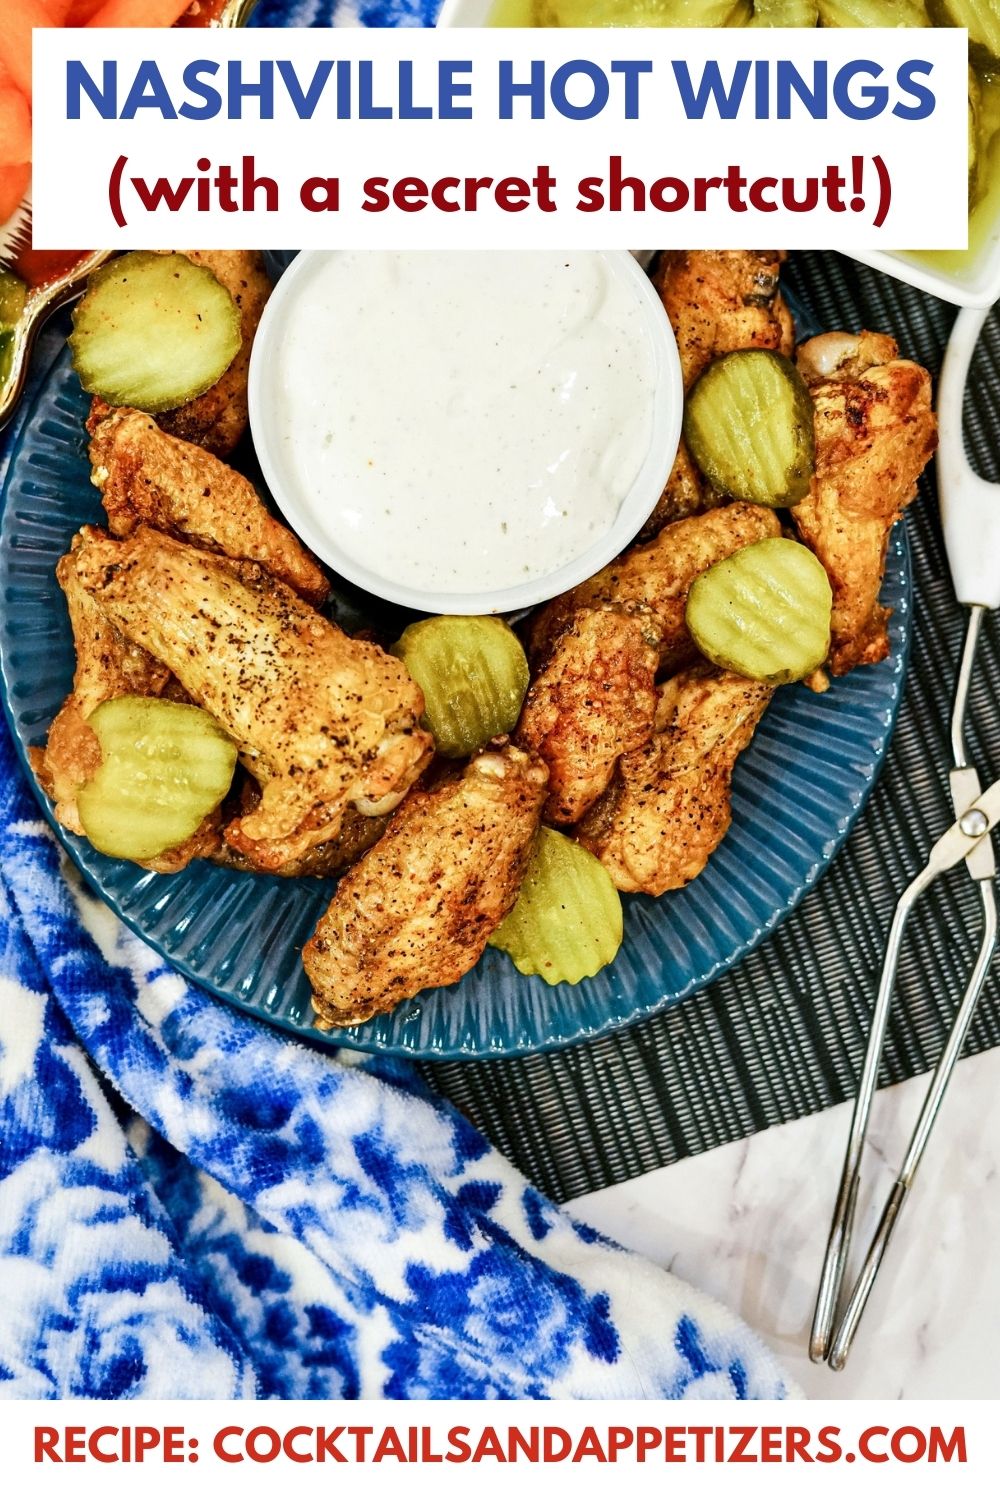 Nashville hot wings with pickles and dip on a blue plate.